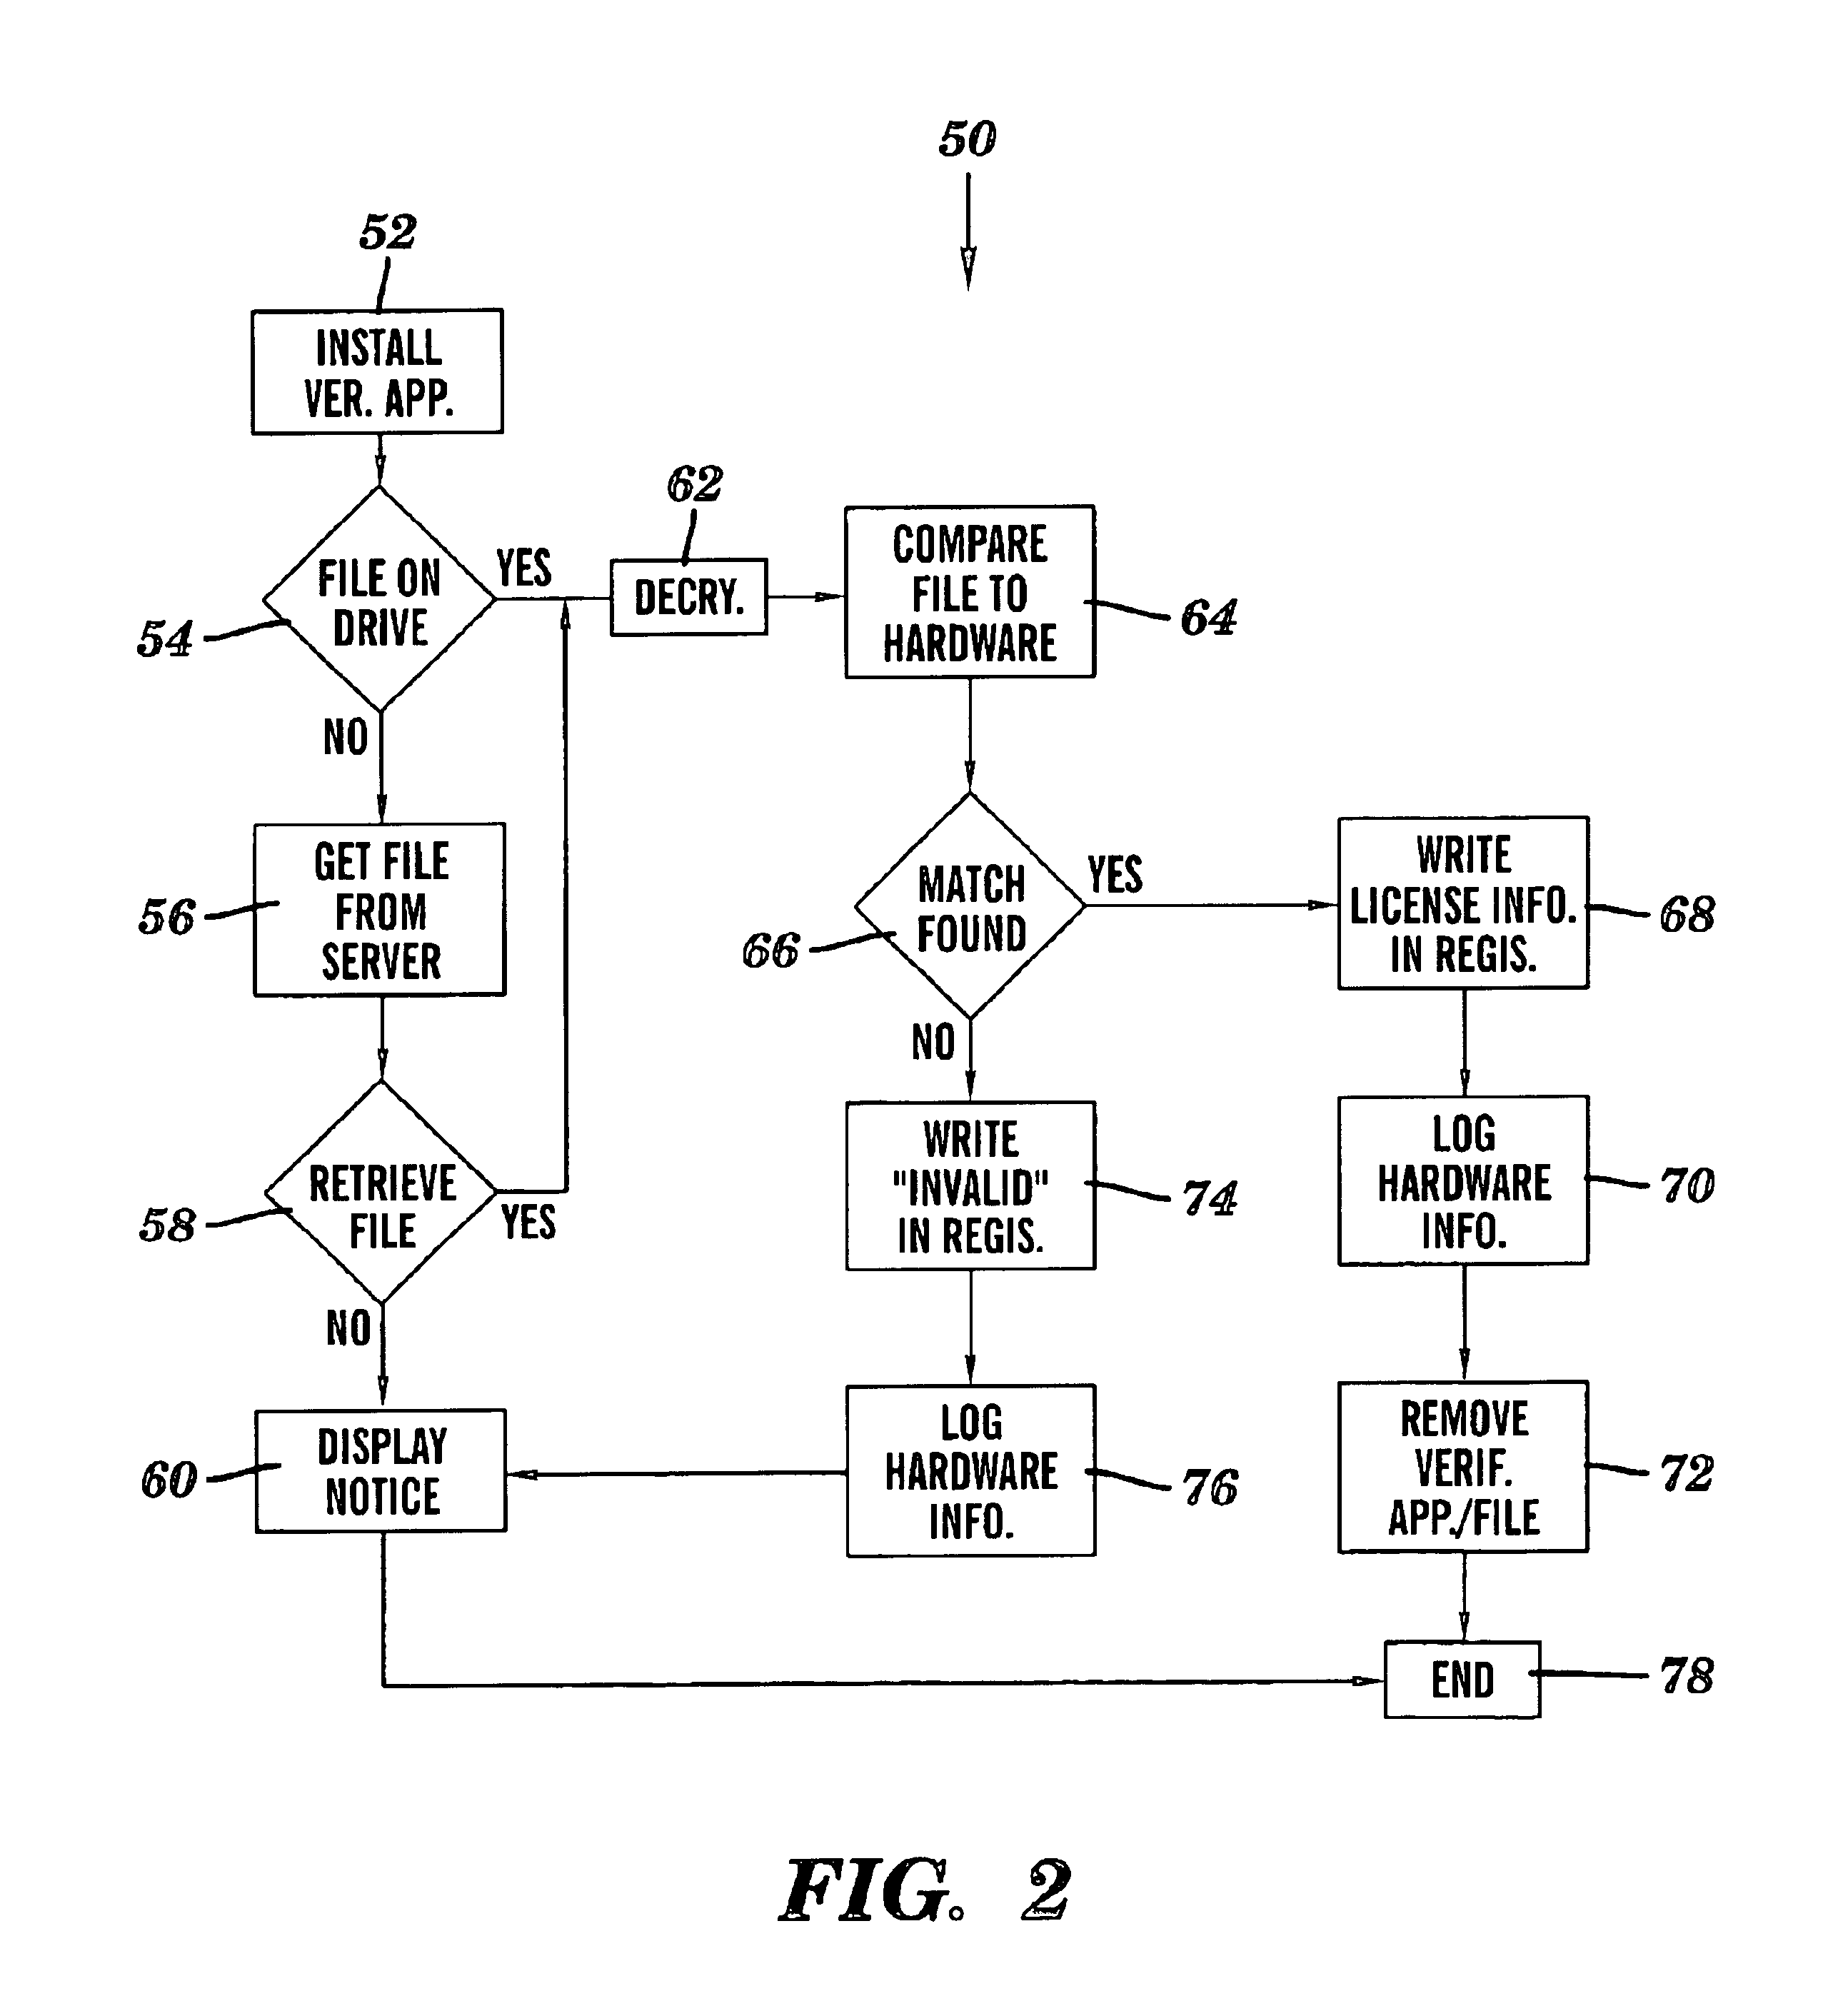 Method and system verifying product licenses using hardware and product identifications